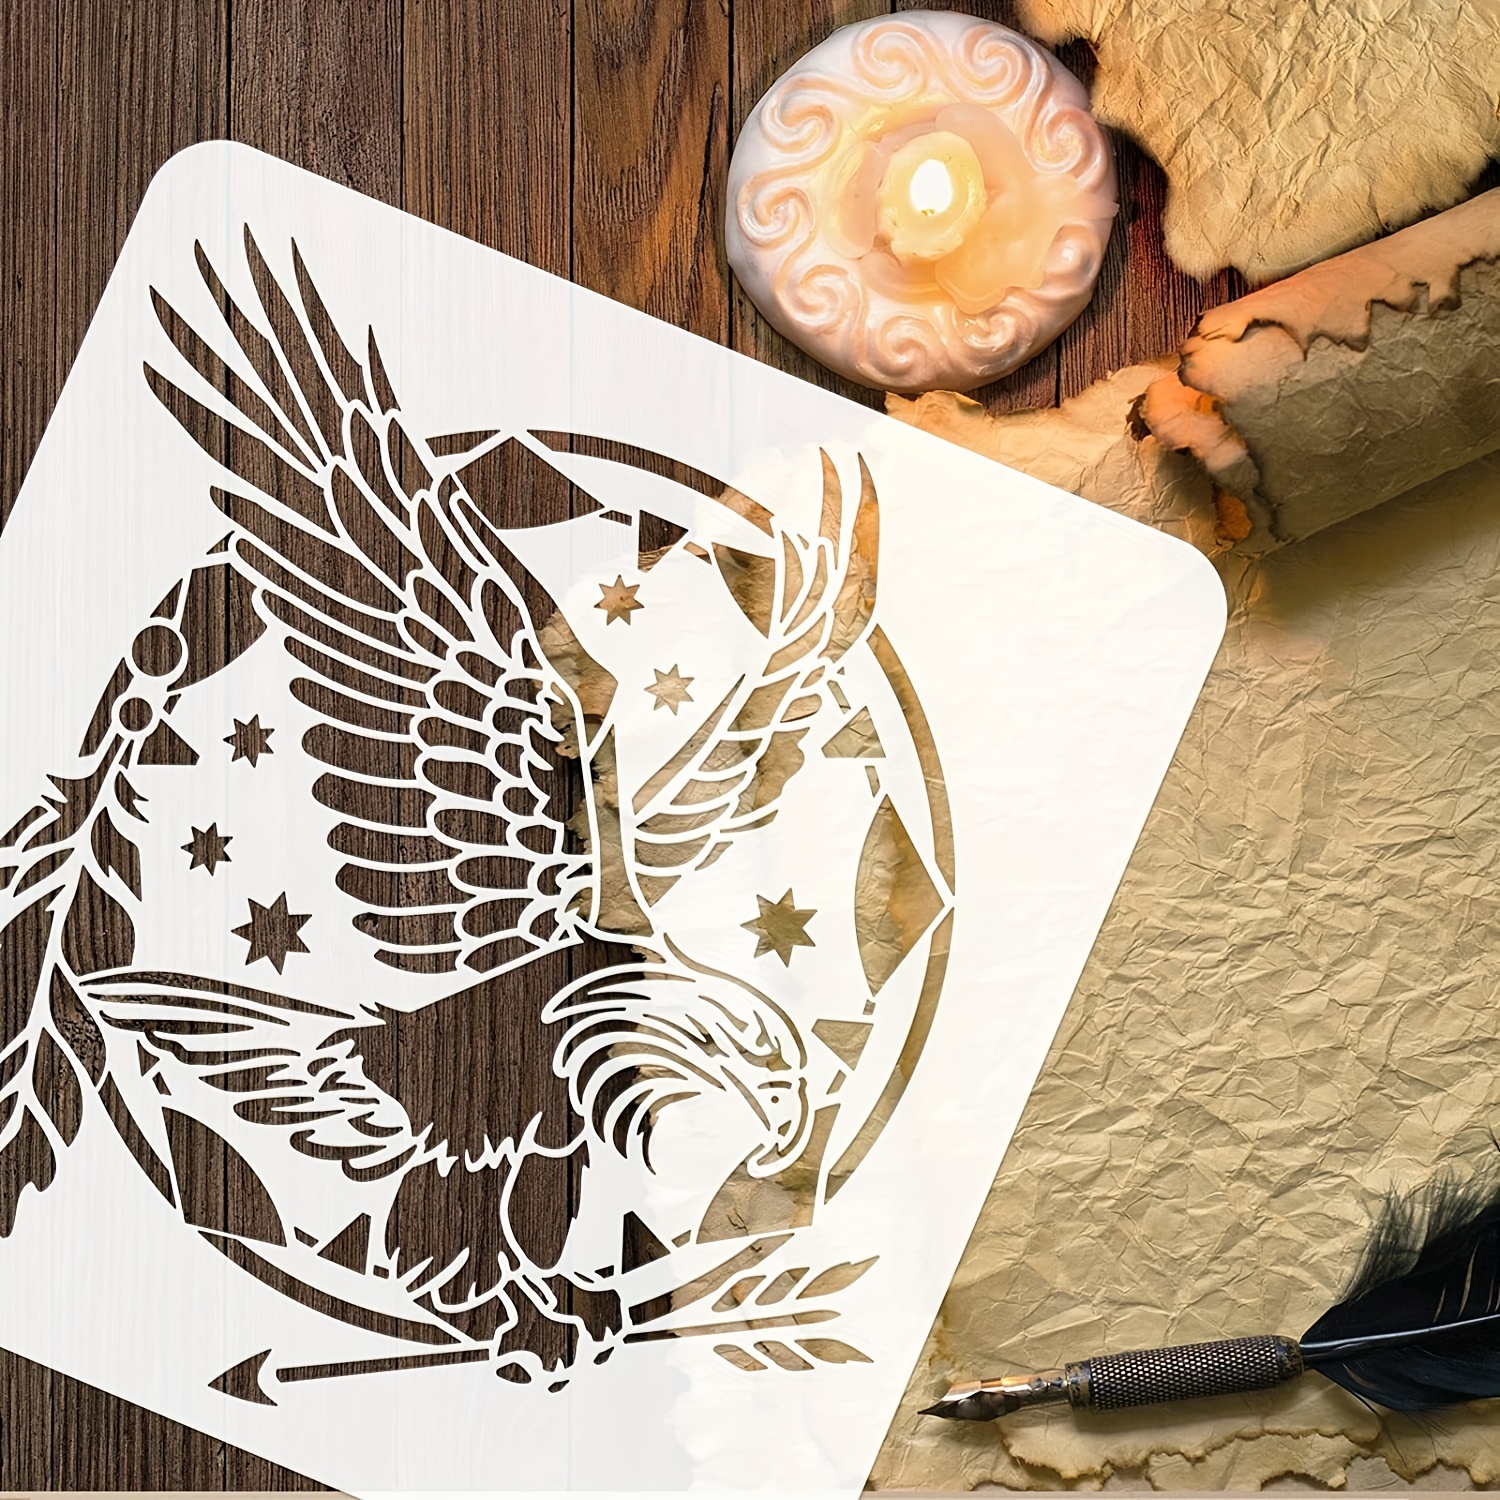 Eagle Stencil Decoration Template Plastic Eagle Drawing Painting Stencils  Square Reusable Stencils for Create DIY Eagle Crafts and Decor 